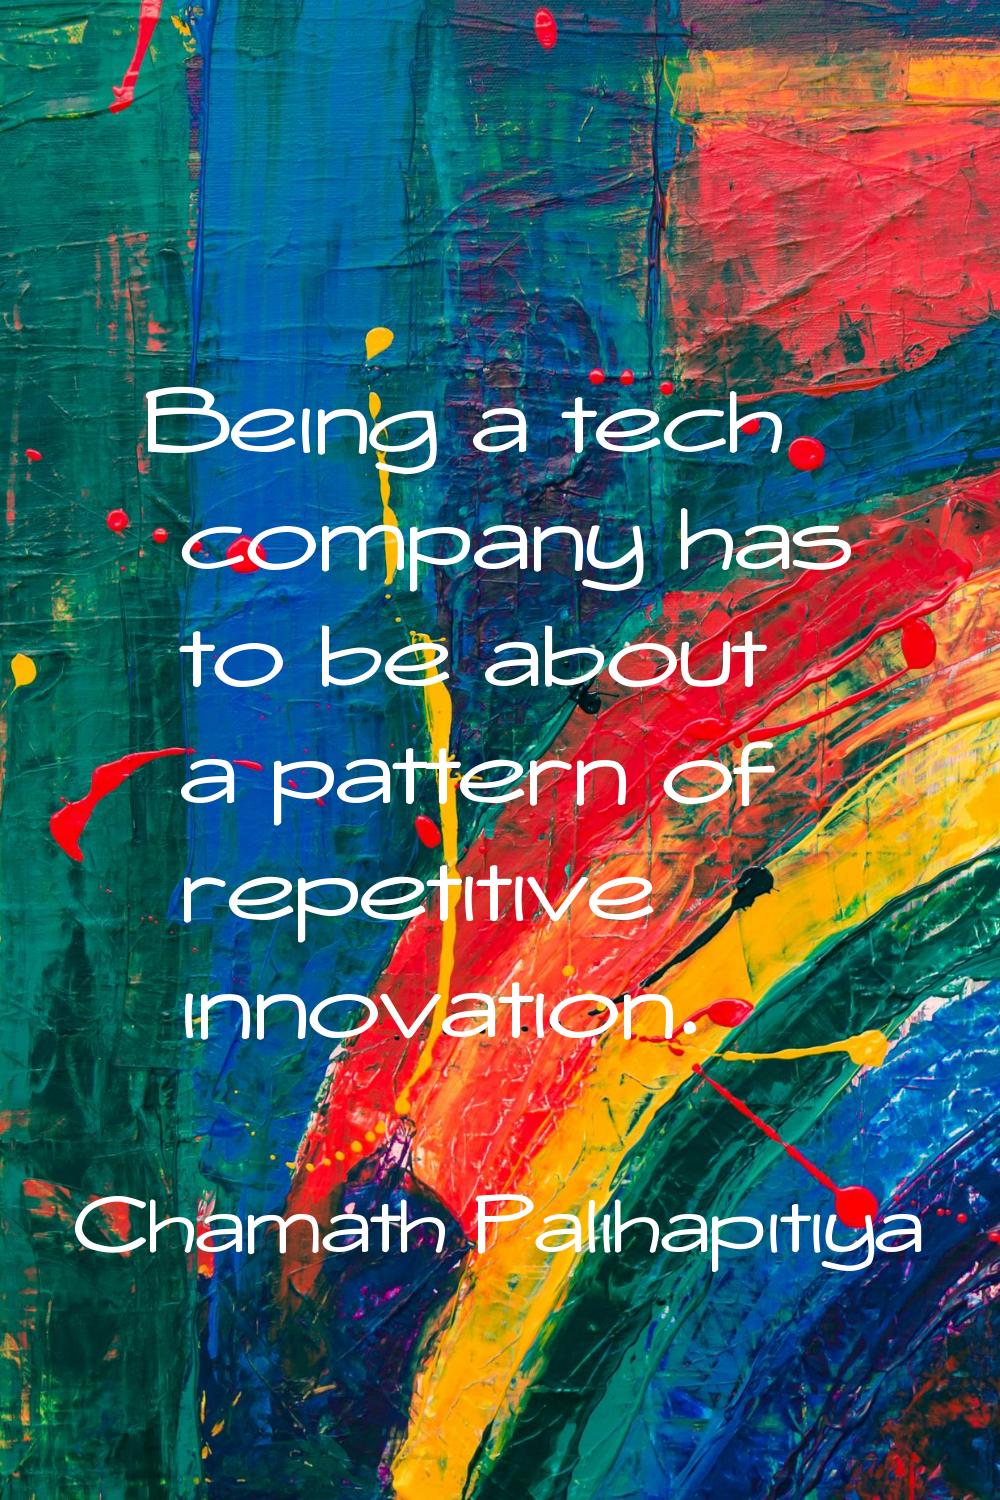 Being a tech company has to be about a pattern of repetitive innovation.